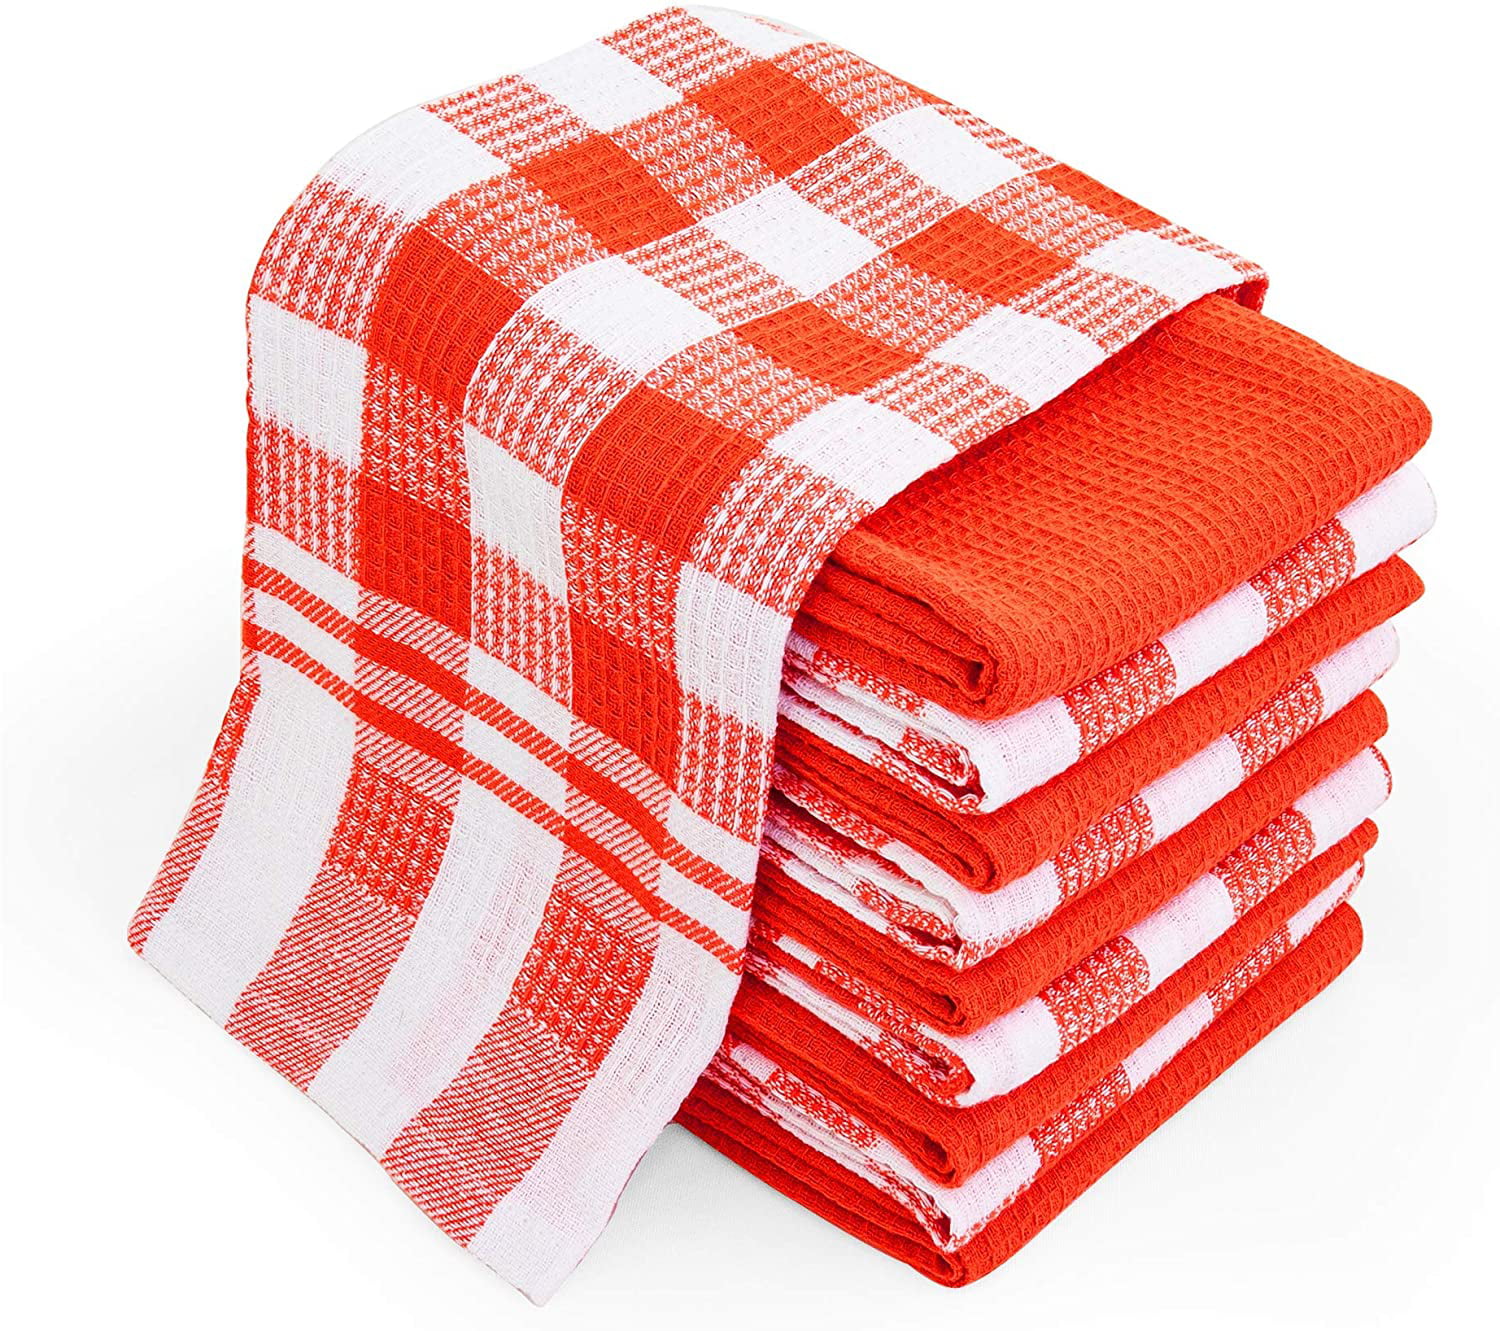 100% Cotton Terry Kitchen Tea Towels Dish Cloths Pack of  5,10 15 